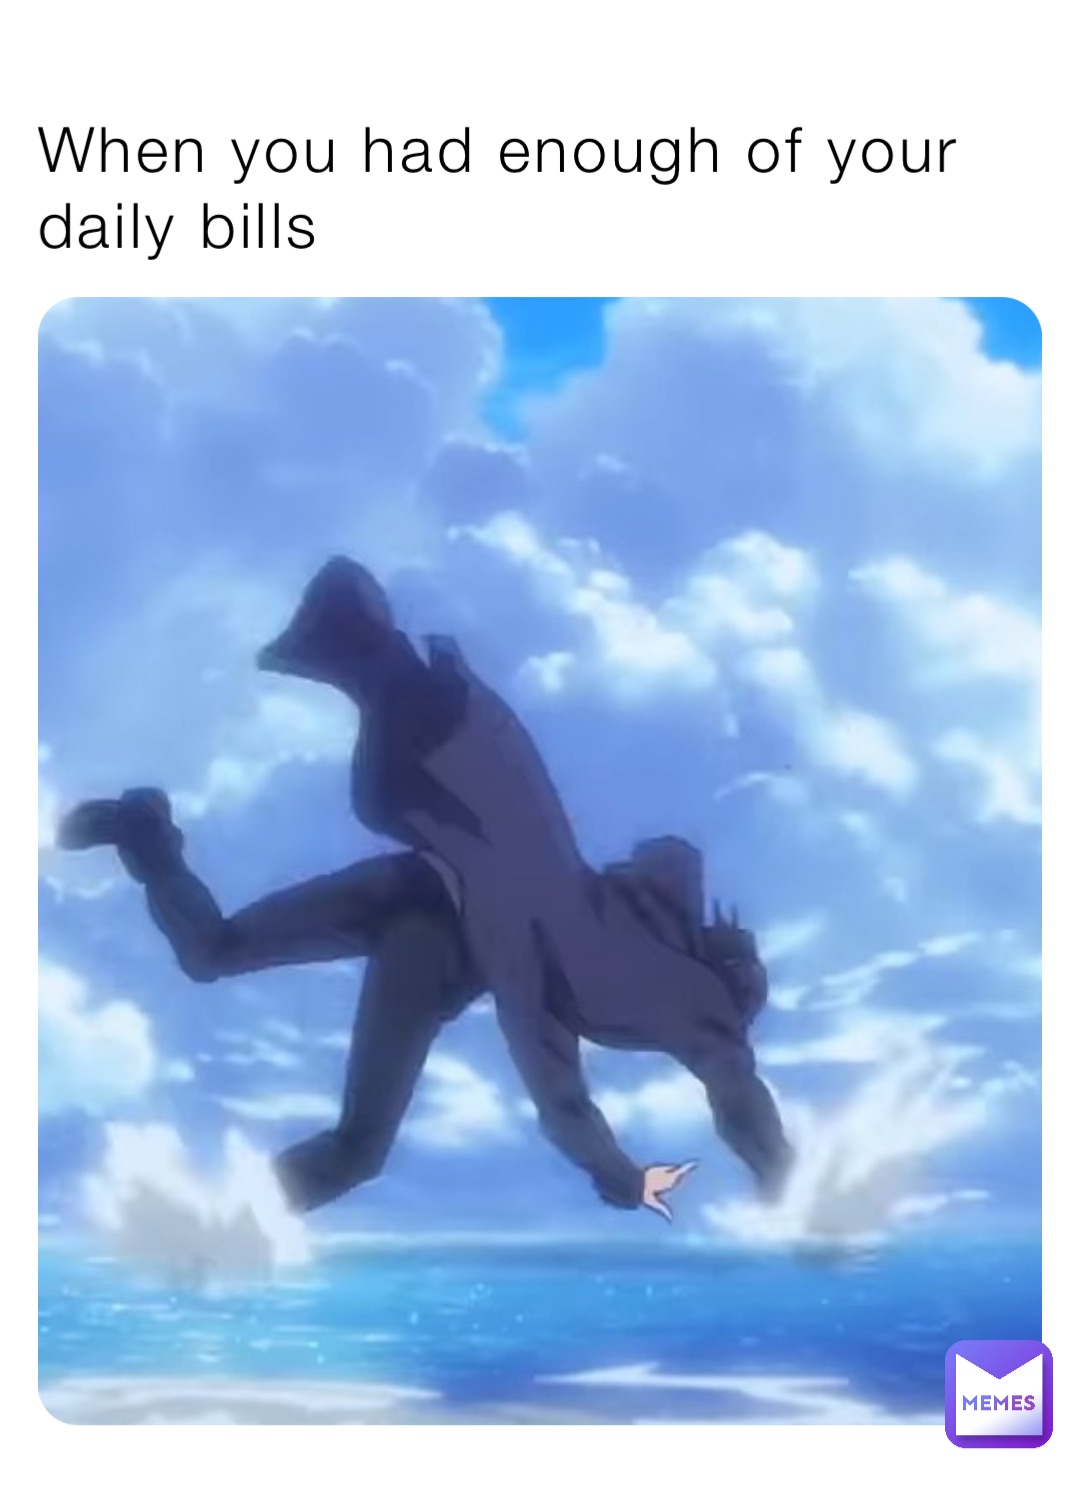 When you had enough of your daily bills